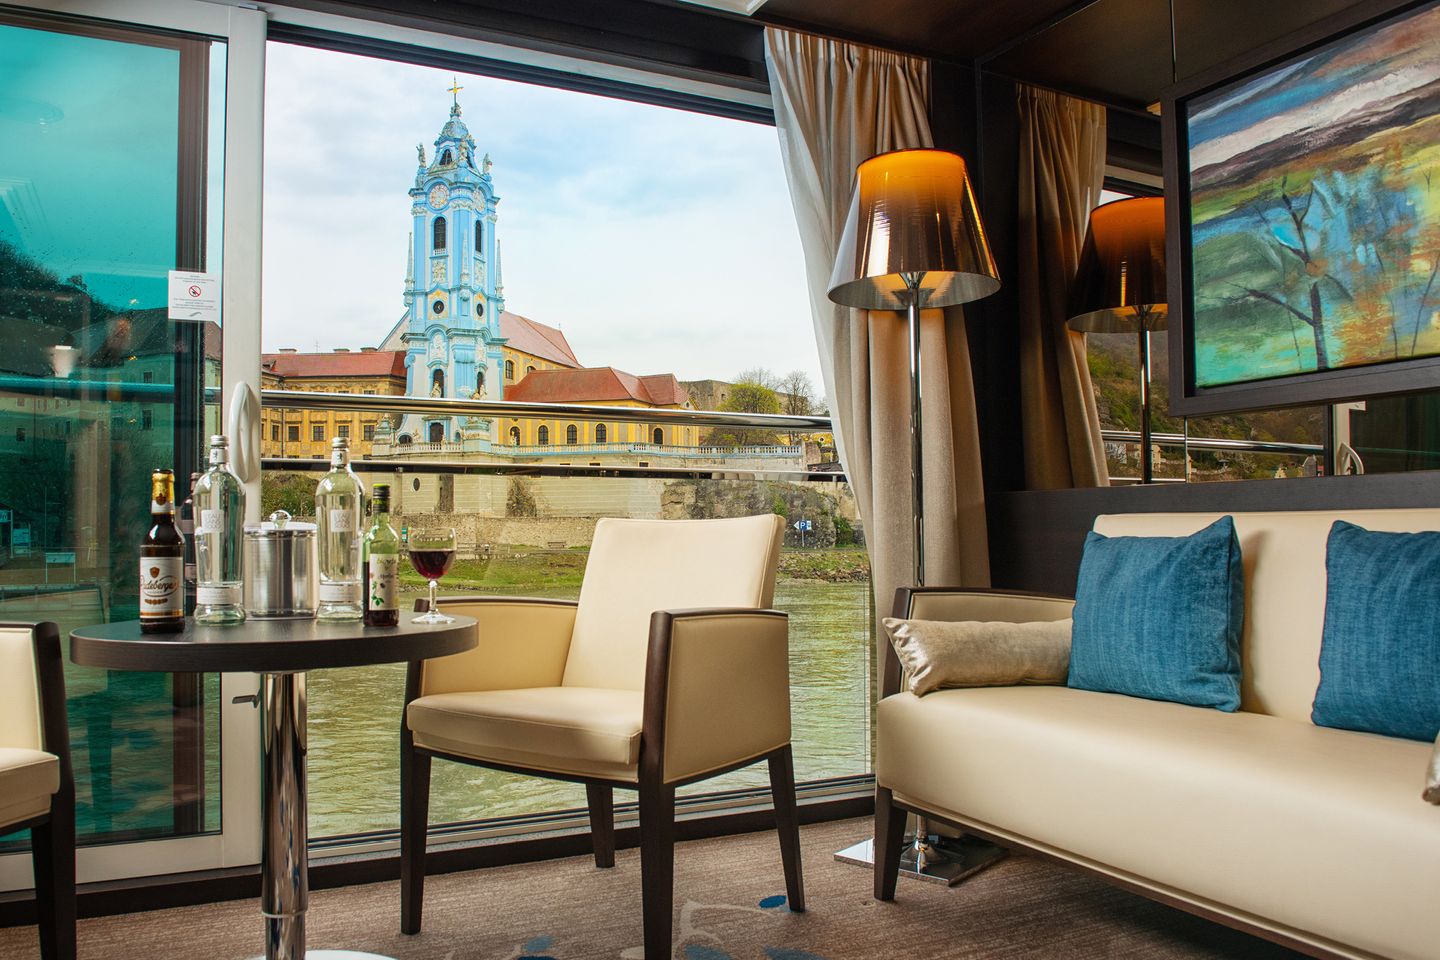 Vineyards, Chateaux & Bordeaux With 2 Nights In Lucerne